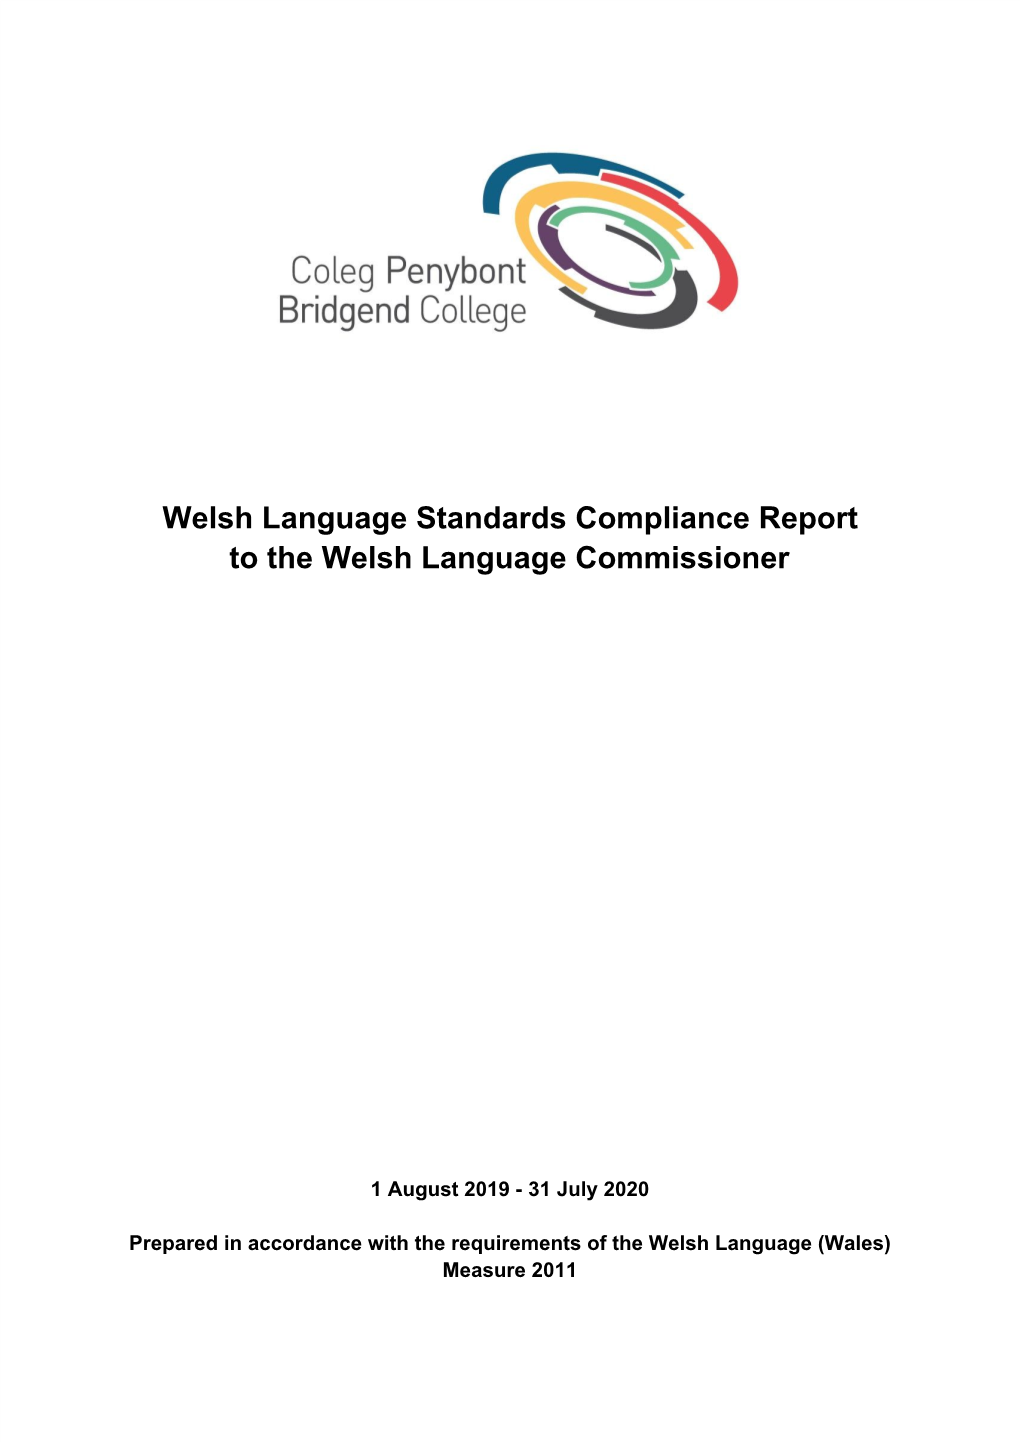 Welsh Language Standards Compliance Report to the Welsh Language Commissioner